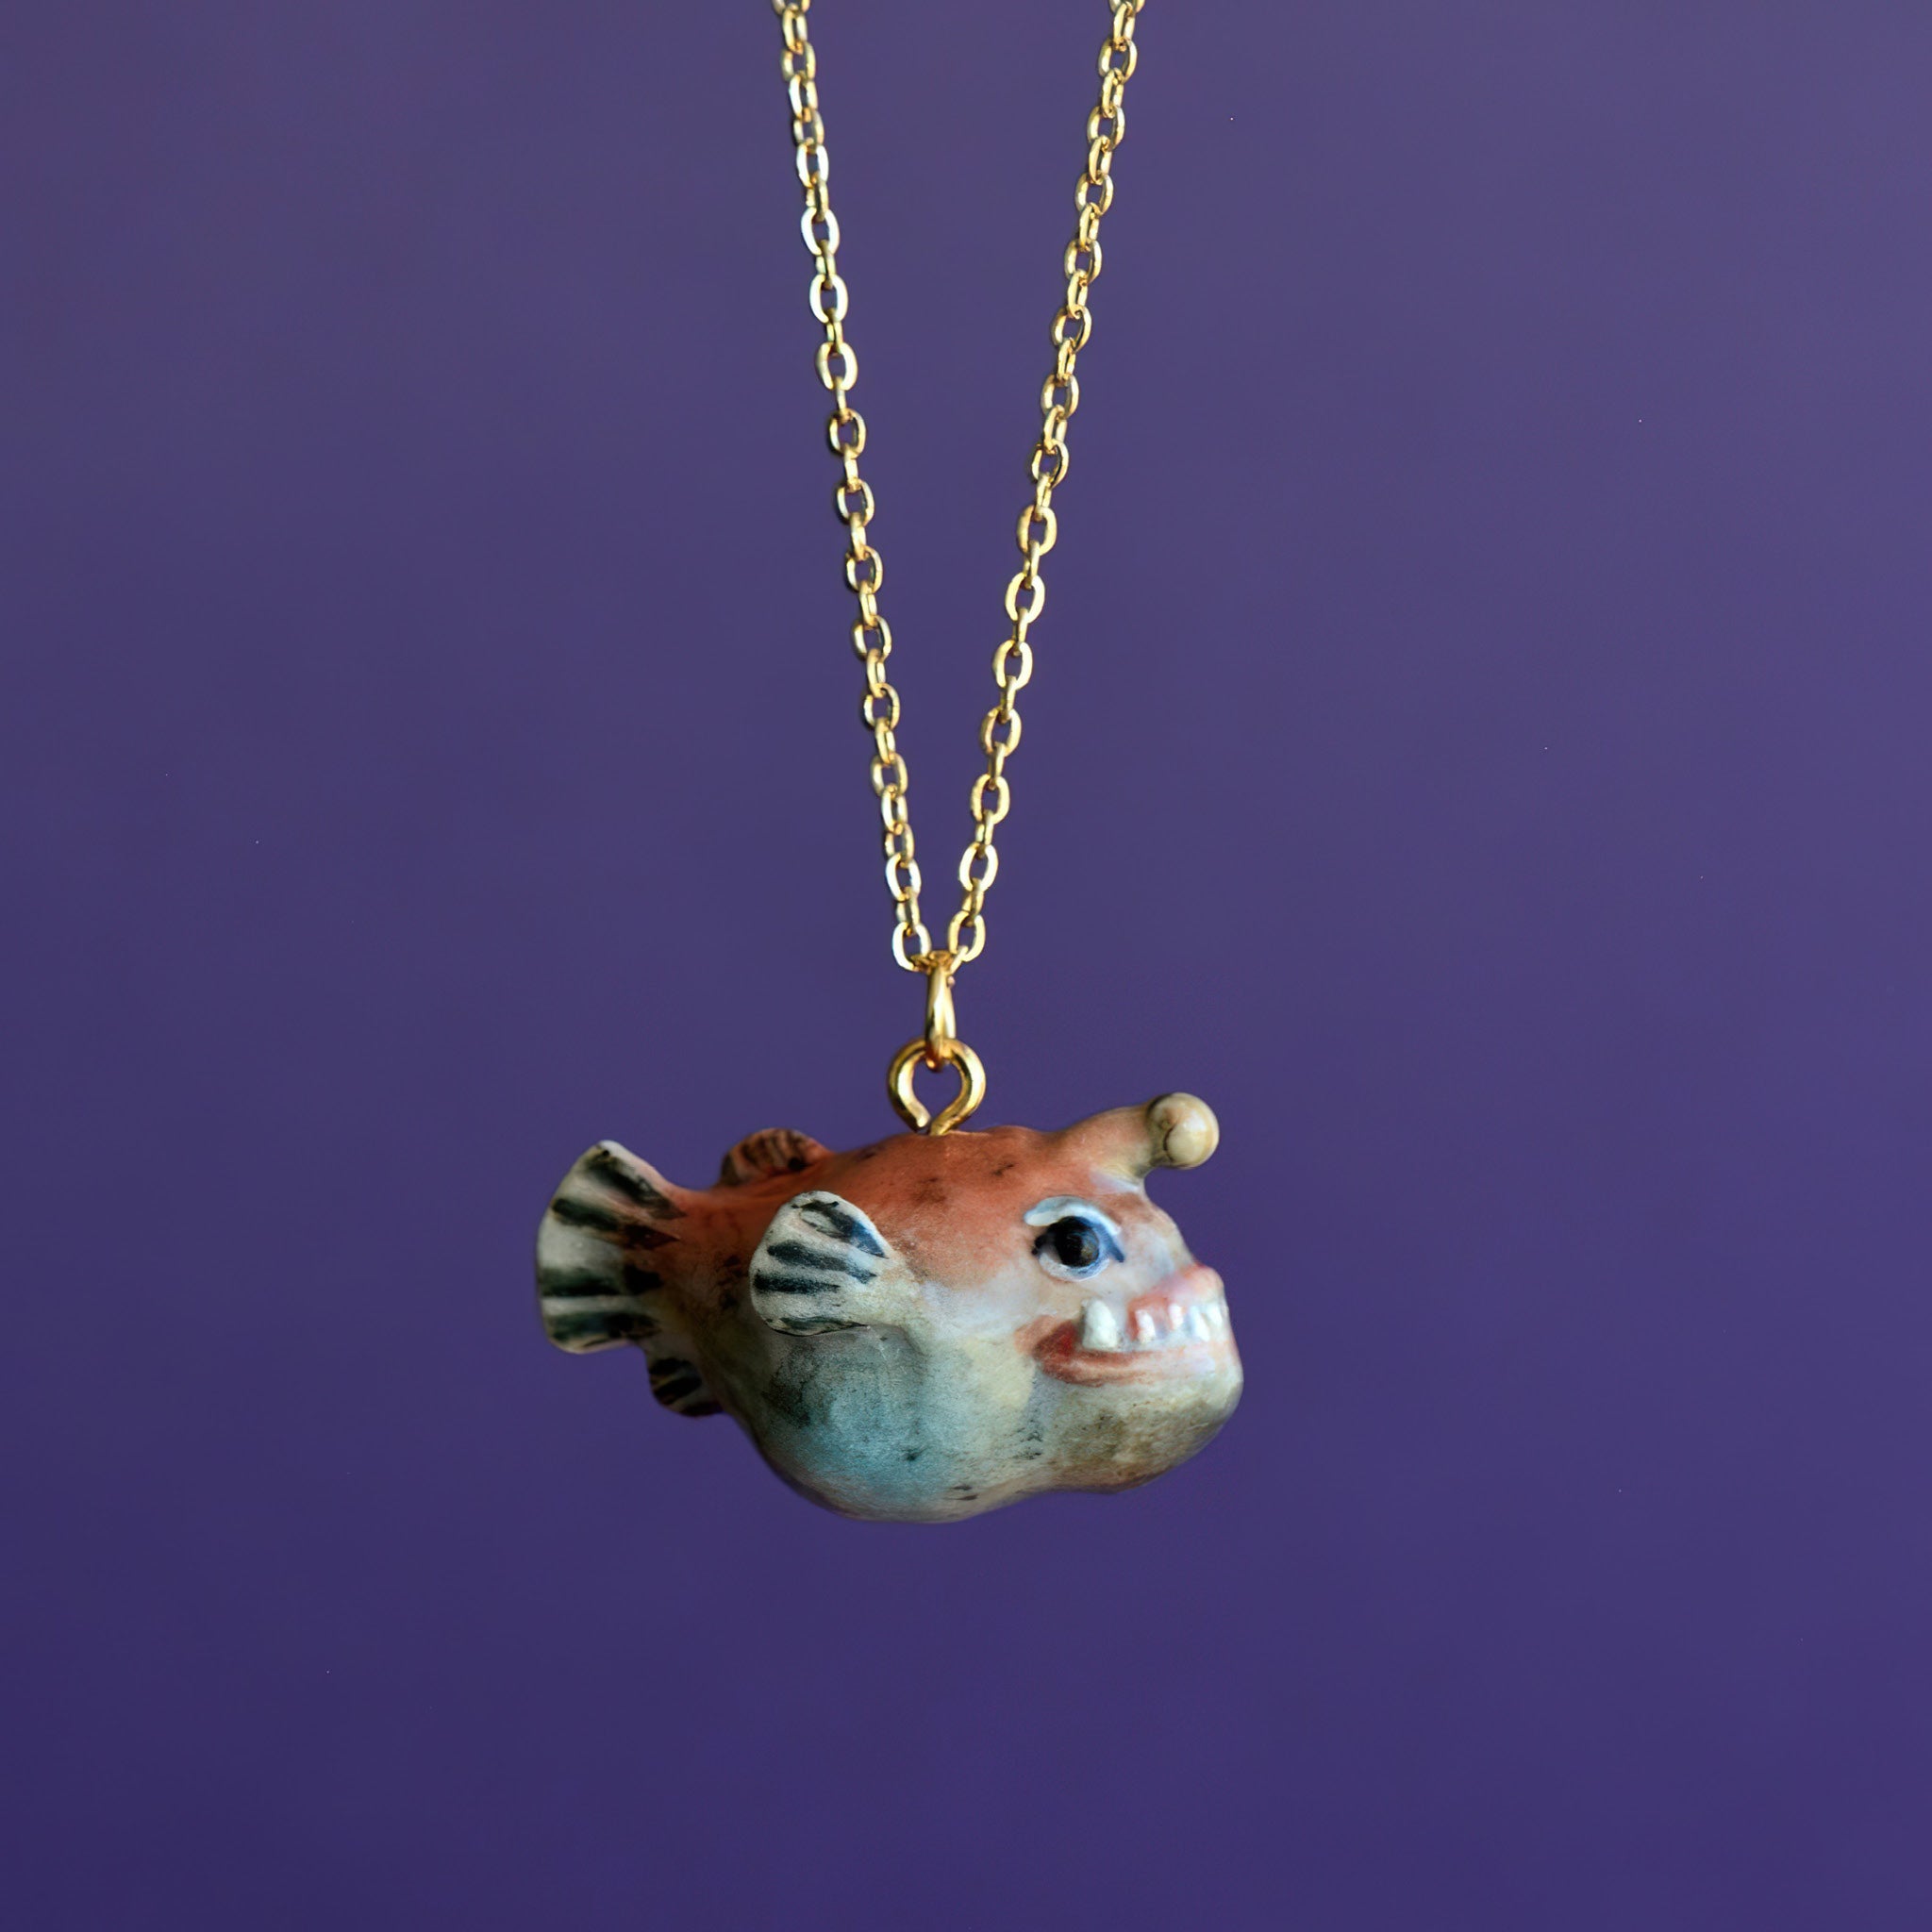 Angler Fish Necklace 🌊 Camp Hollow Animal Jewelry